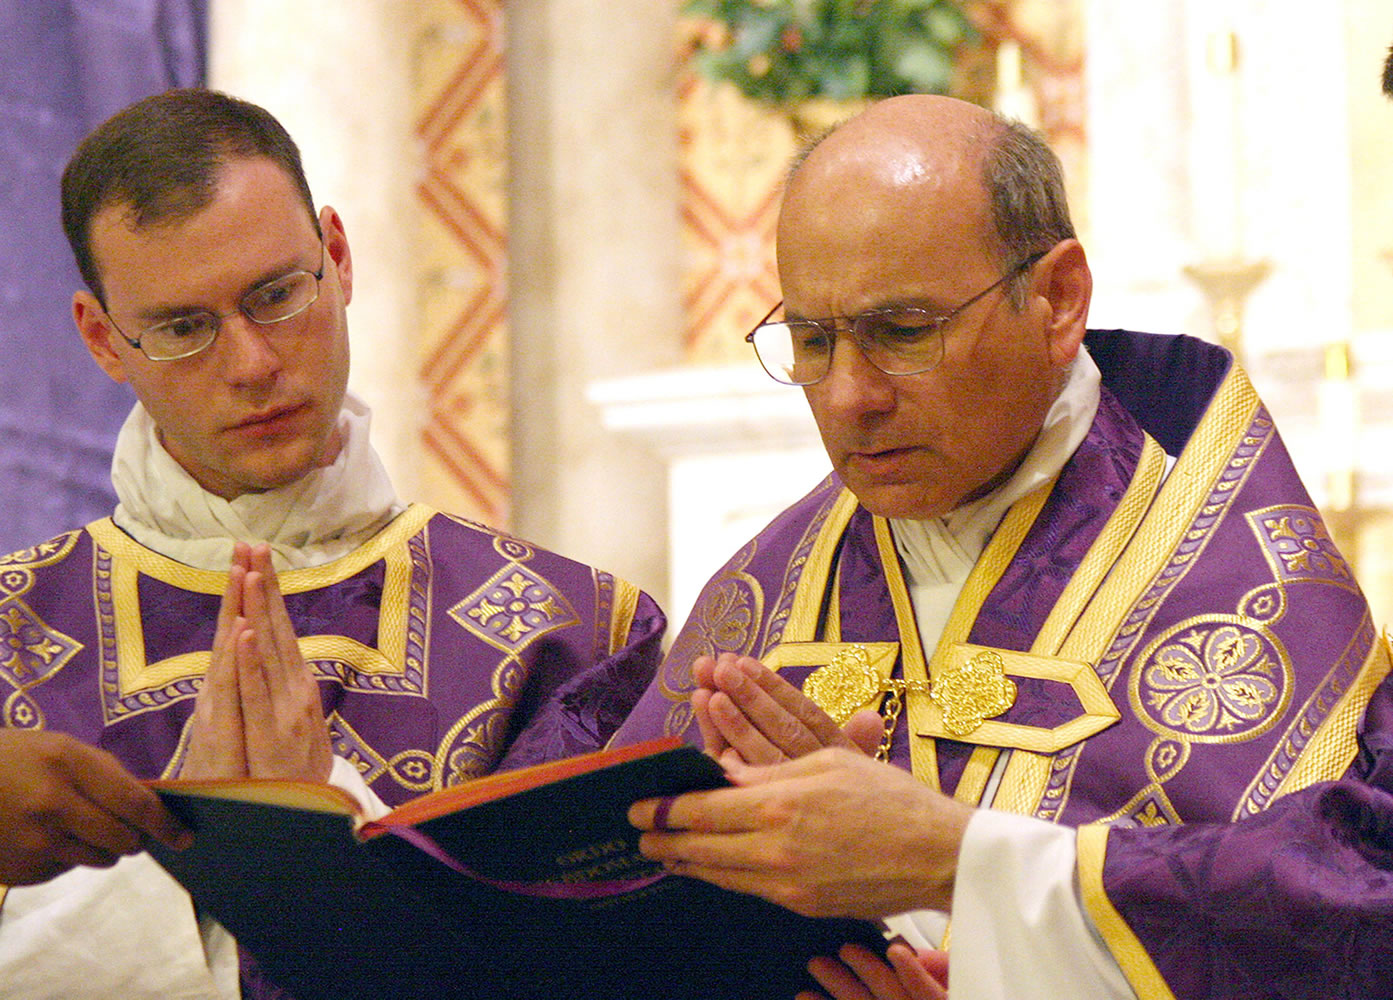 The Catholic Sun files
The Rev. Kenneth Walker, left, and the Rev. Joseph Terra celebrate Mass in Phoenix. The date is unknown. Walker was killed and Terra was critically injured Wednesday.